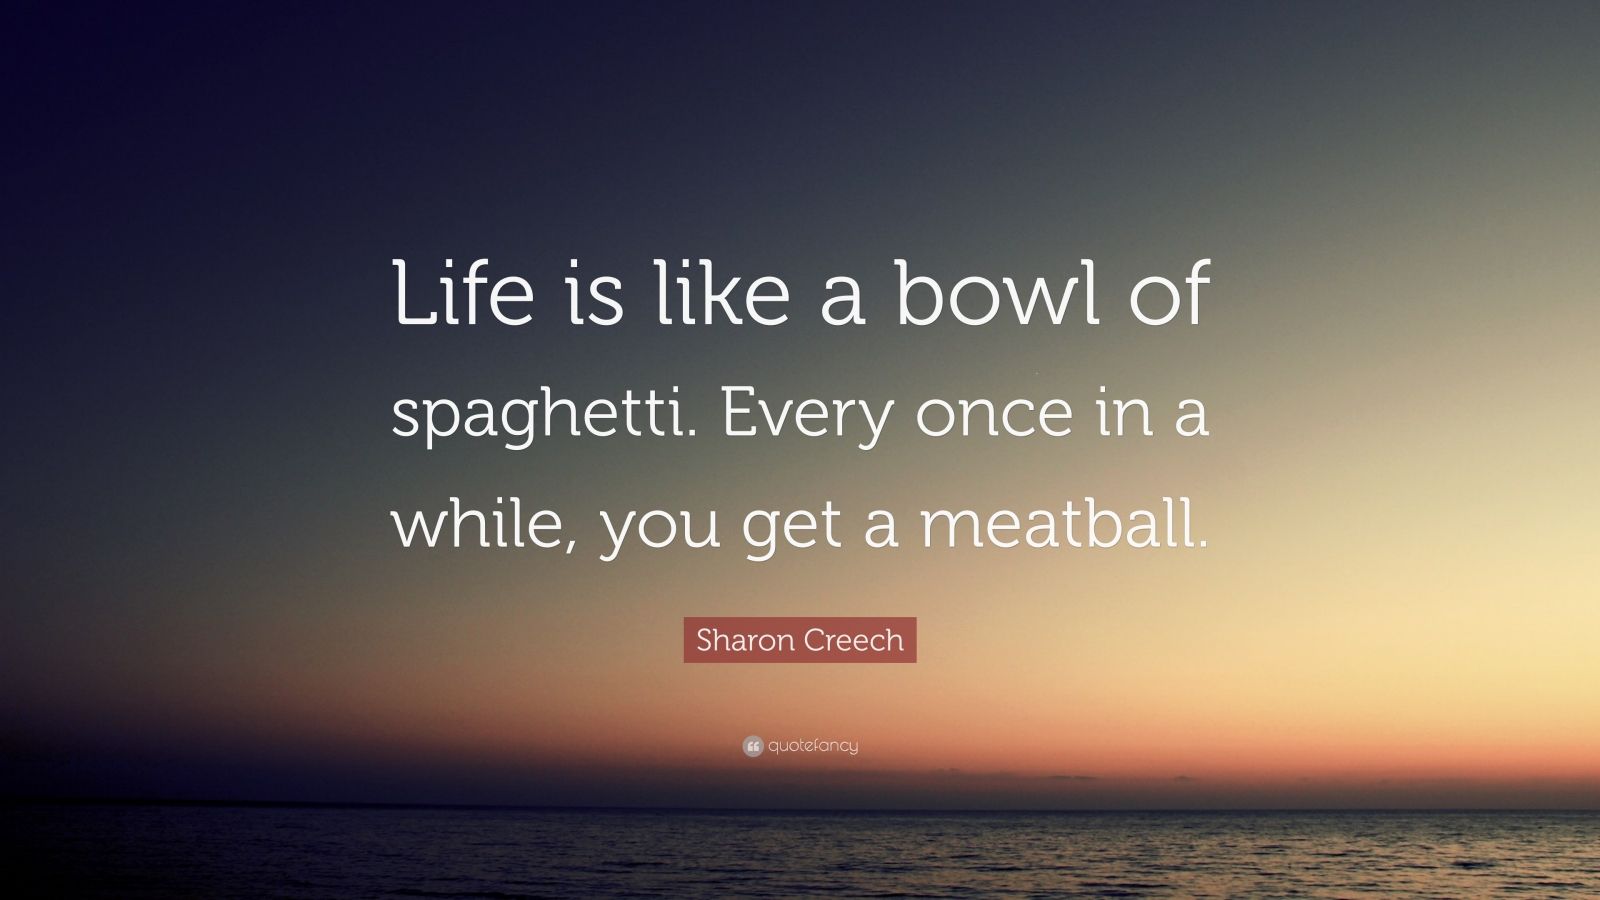 Sharon Creech Quote: “Life is like a bowl of spaghetti. Every once in a ...